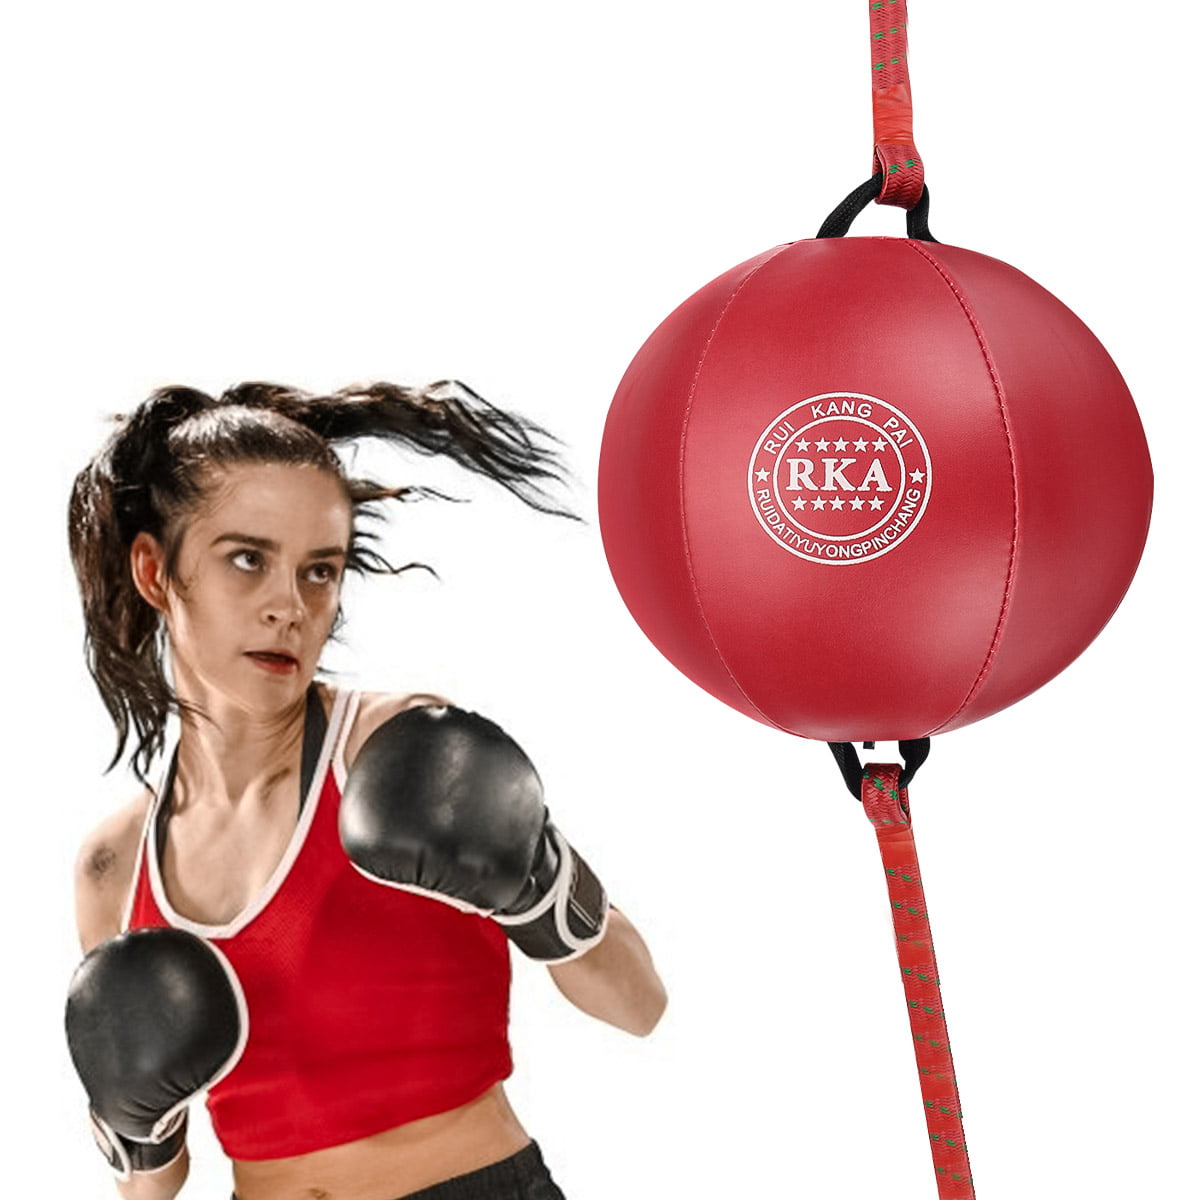 Reflex PU Leather Boxing Speed Ball Inflatable Sports Equipment Fitness Training